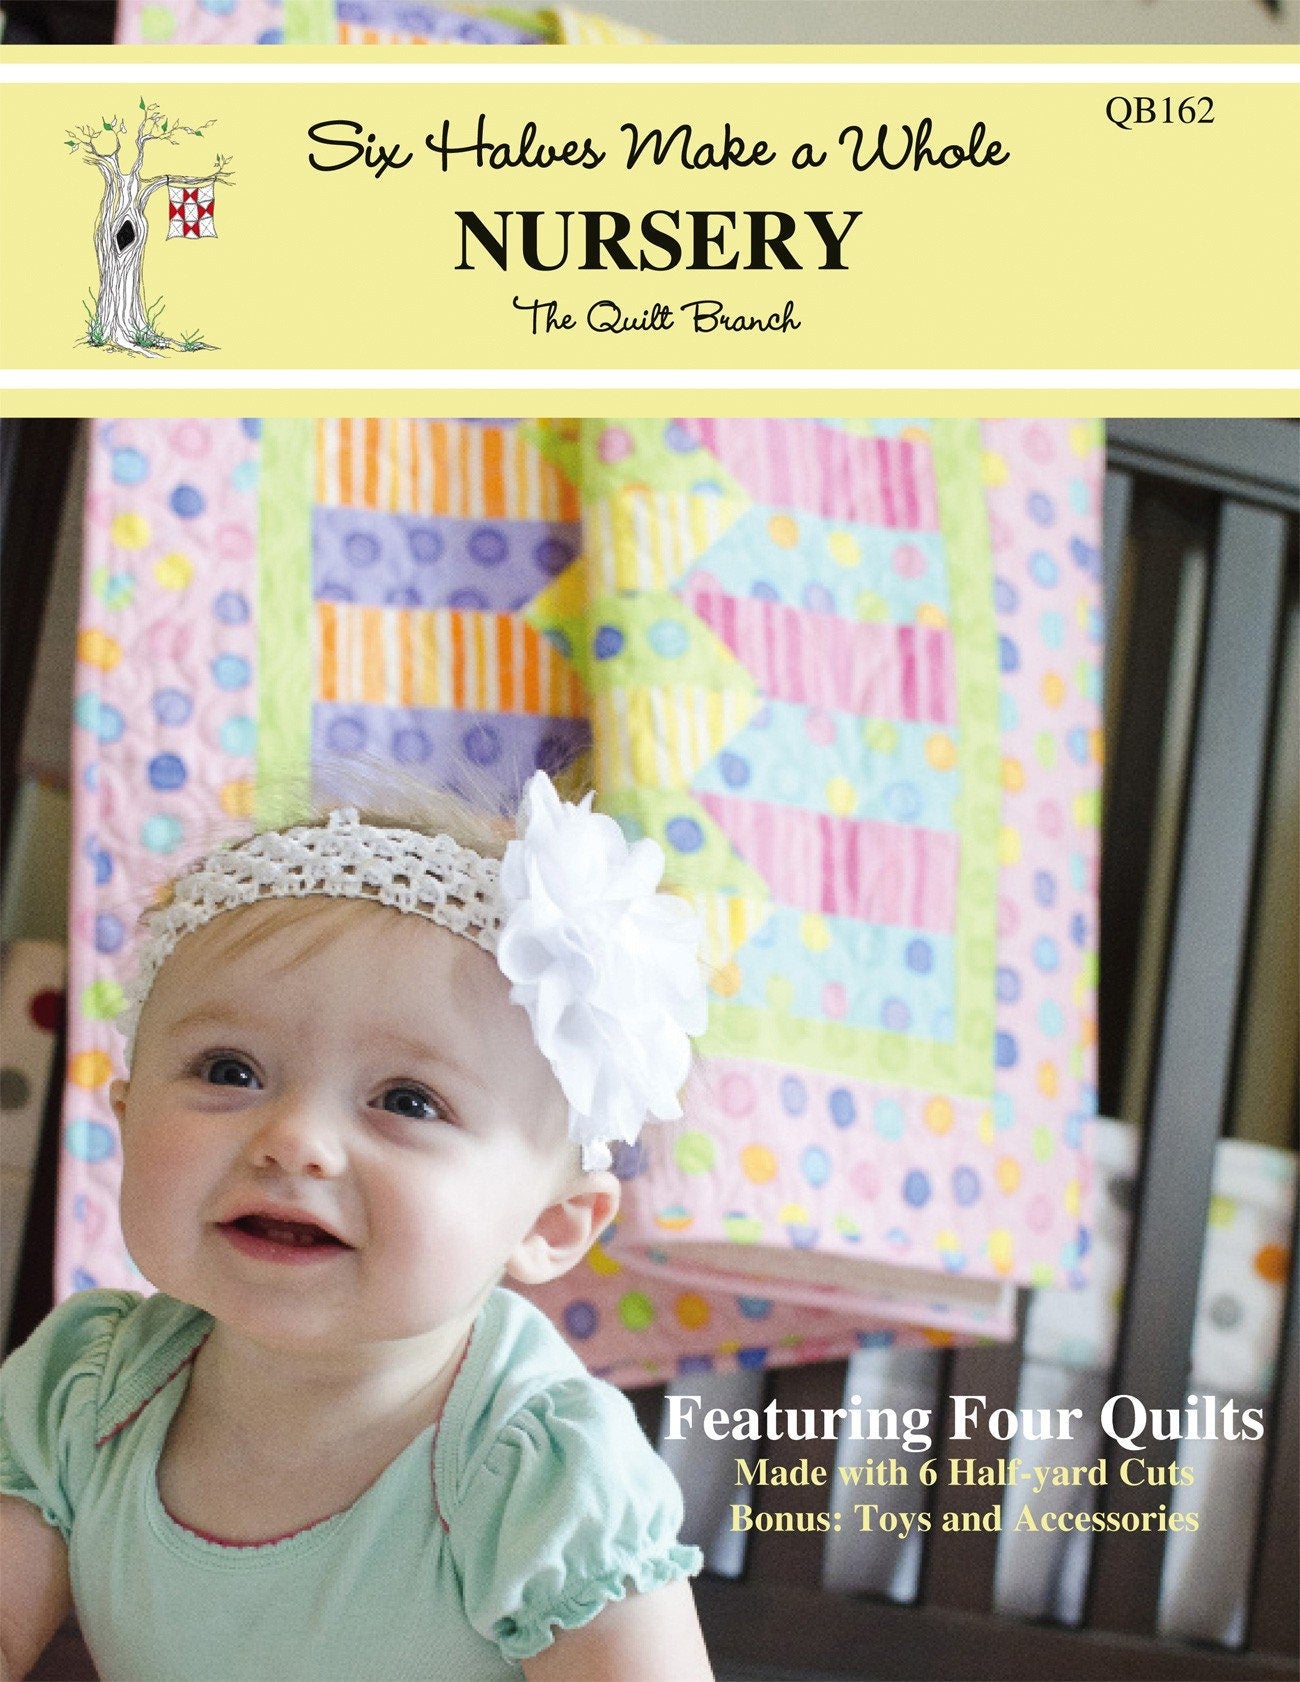 Six Halves Make A Whole Nursery Quilt Pattern Book by Susan Knapp of The Quilt Branch